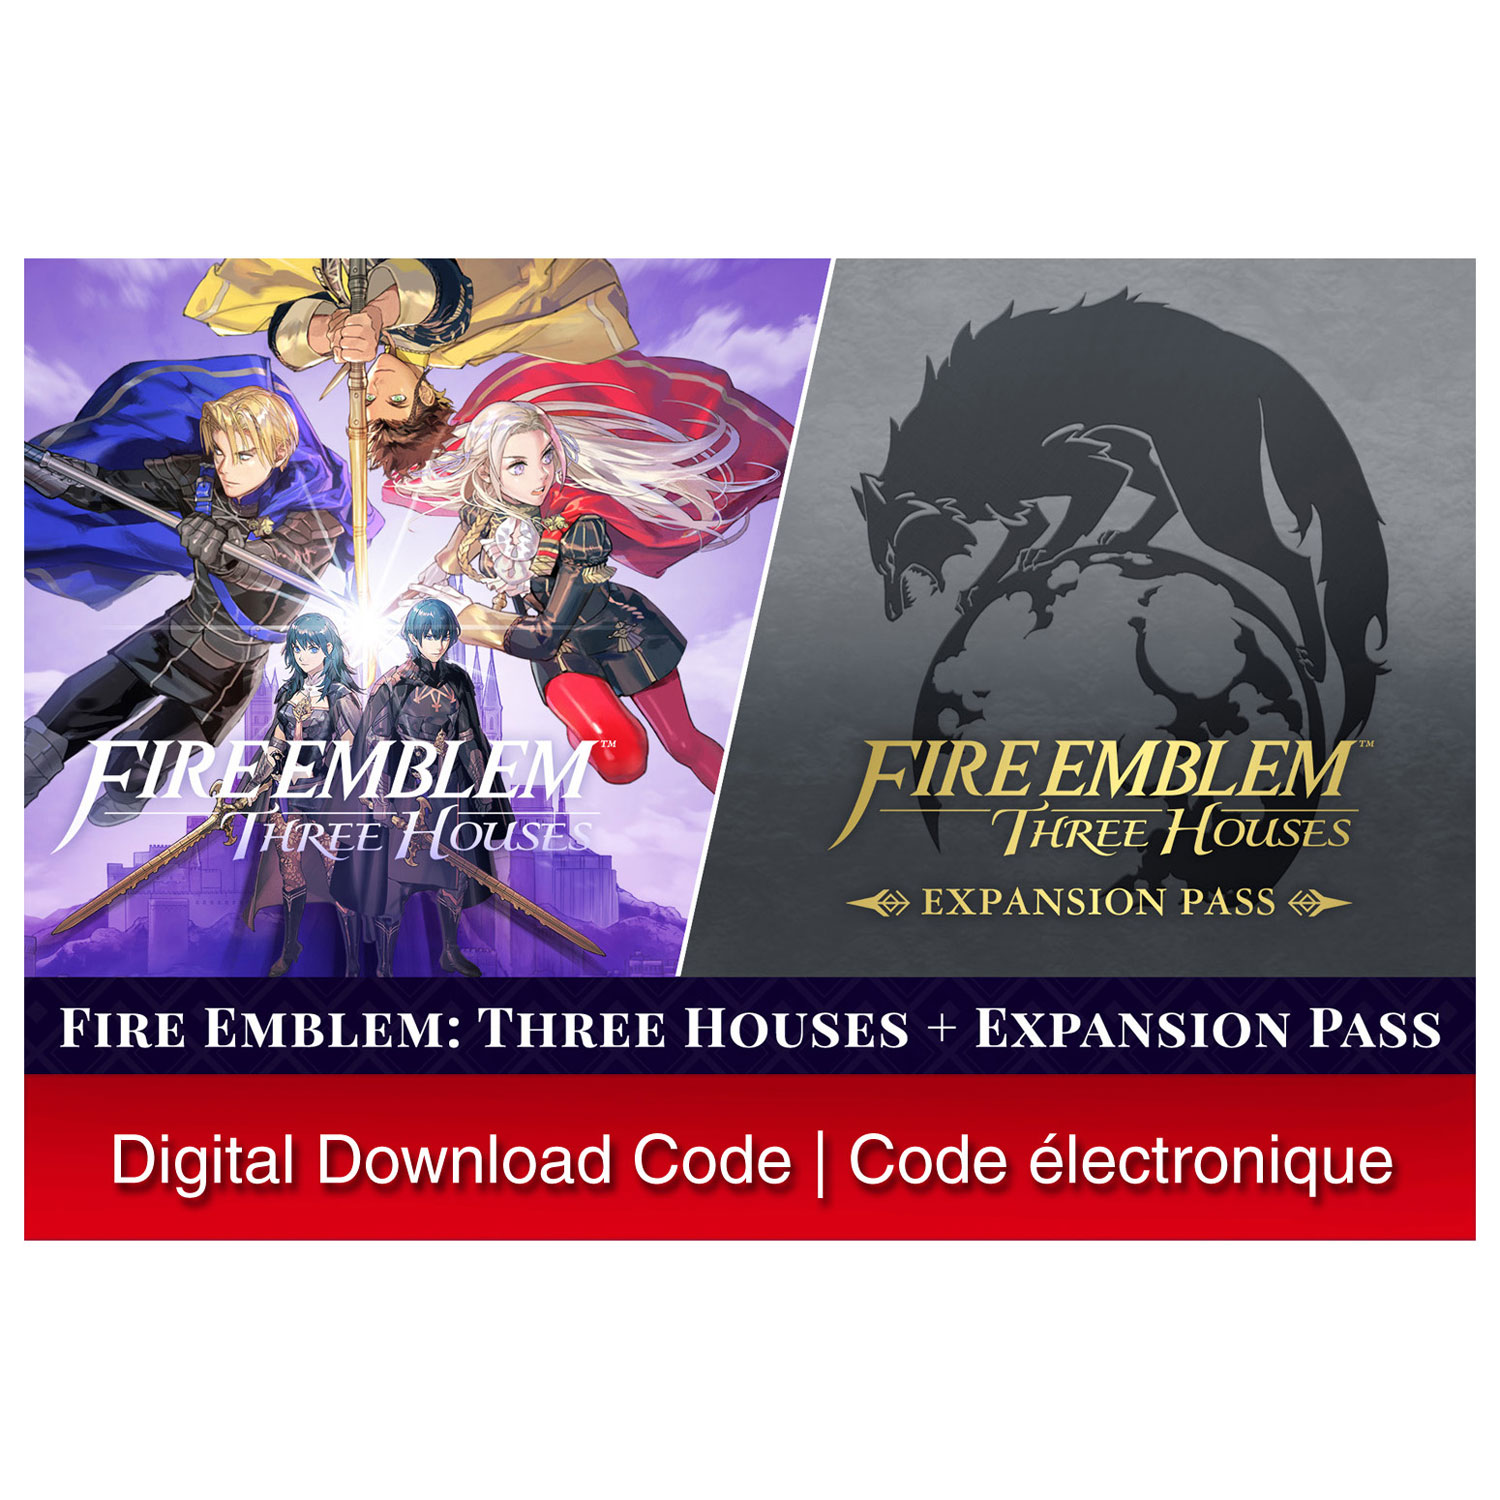 Fire Emblem Three Houses with Expansion Pass (Switch) - Digital Download